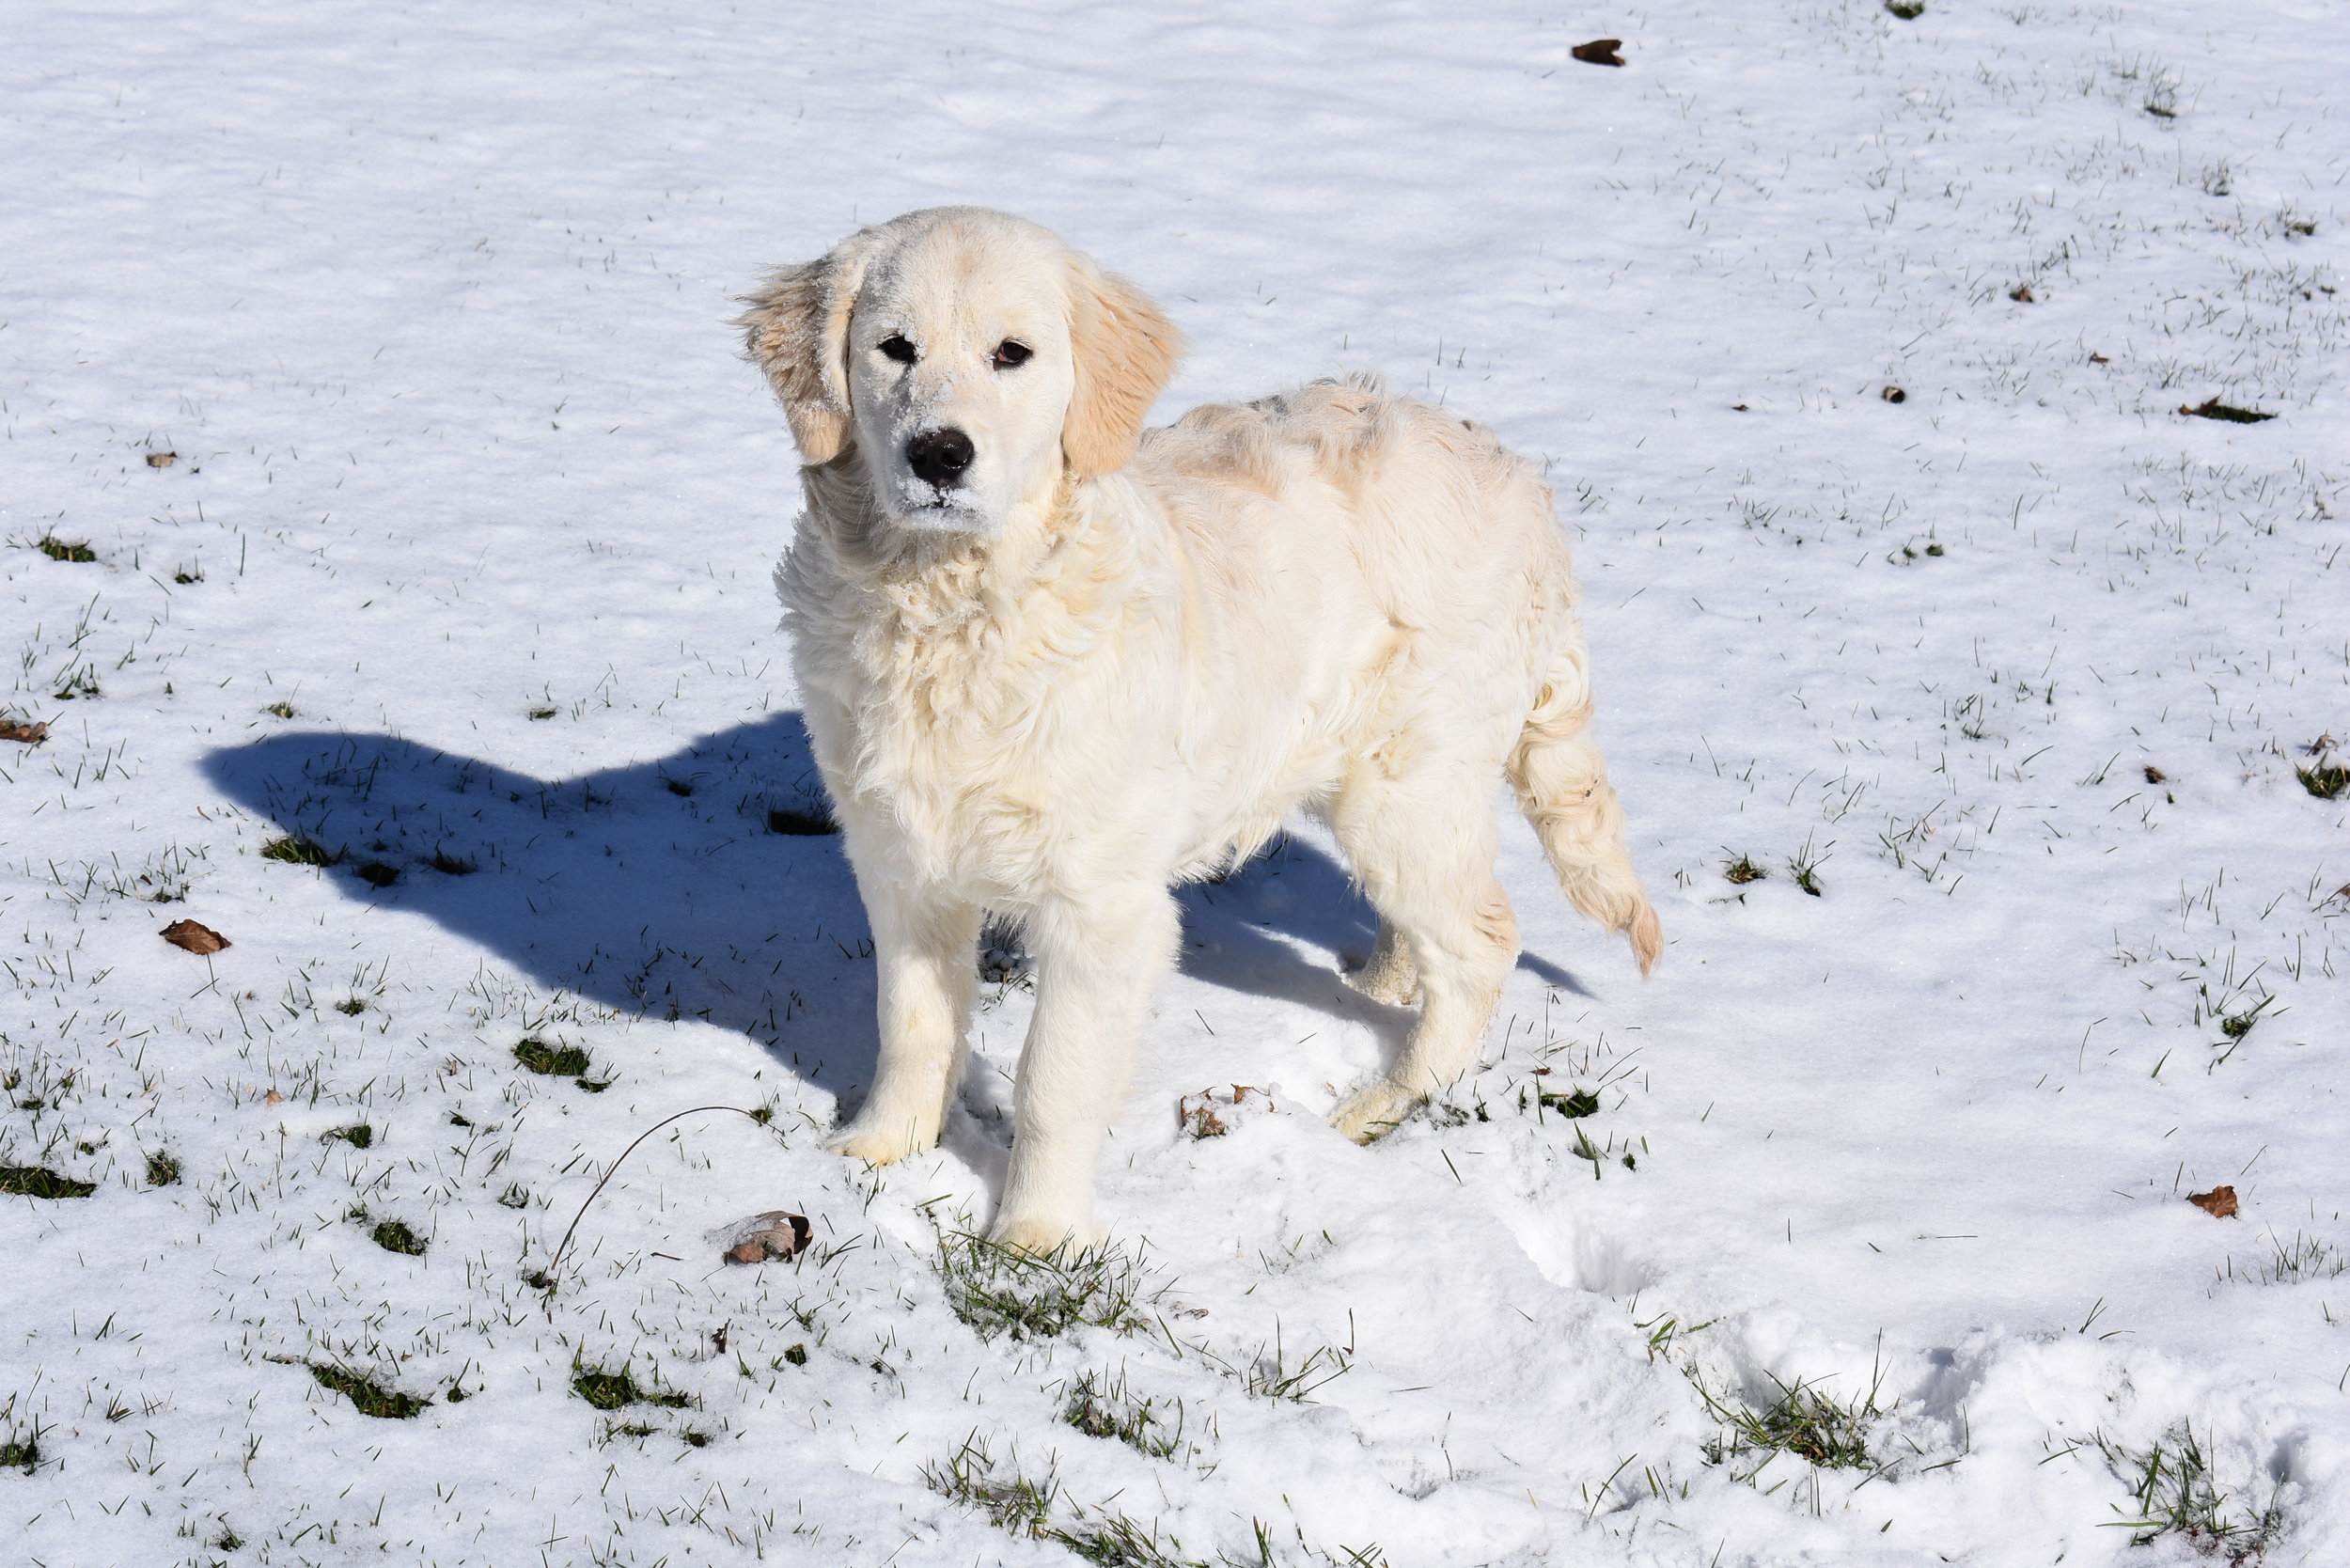  Golden retriever dog playing in the snow that will breed with a poodle to give birth to a Golden Doodle puppy 